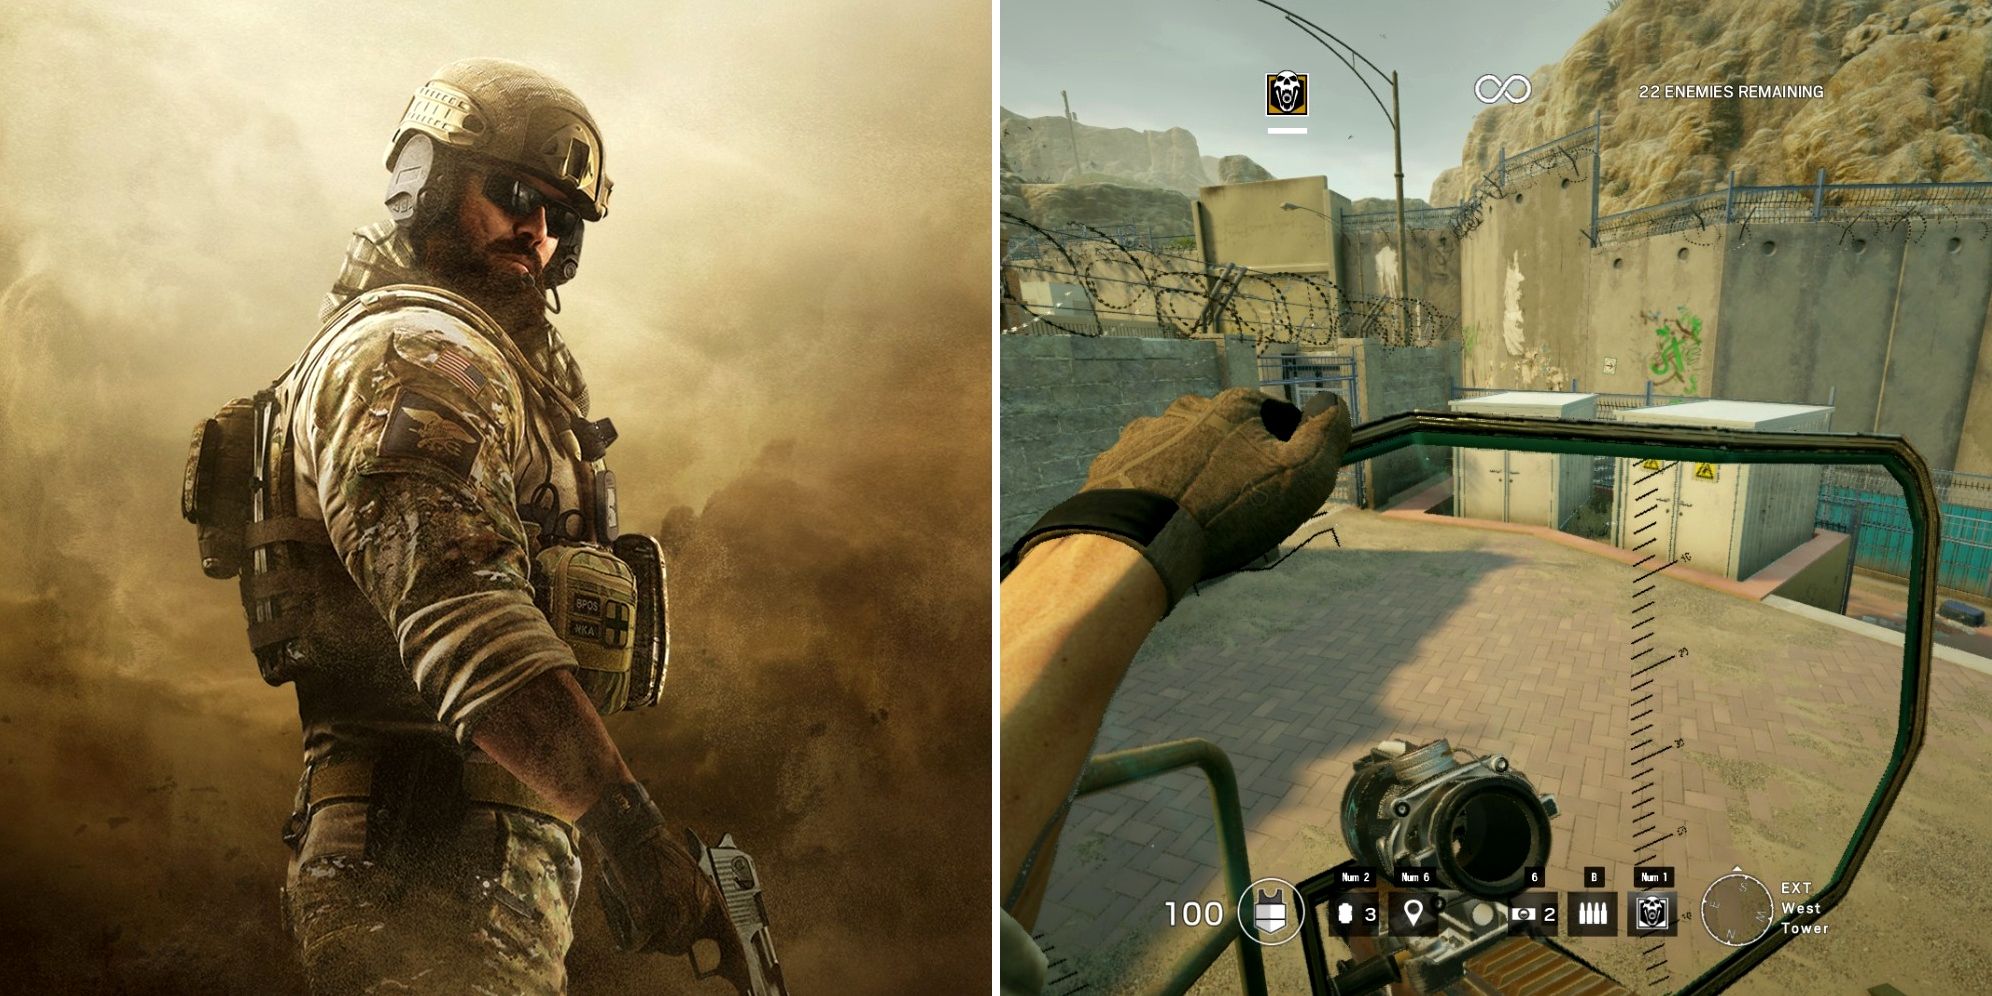 Rainbow Six Siege split image of Blackbeard in sandstorm and first-person view equipping rifle shield to weapon